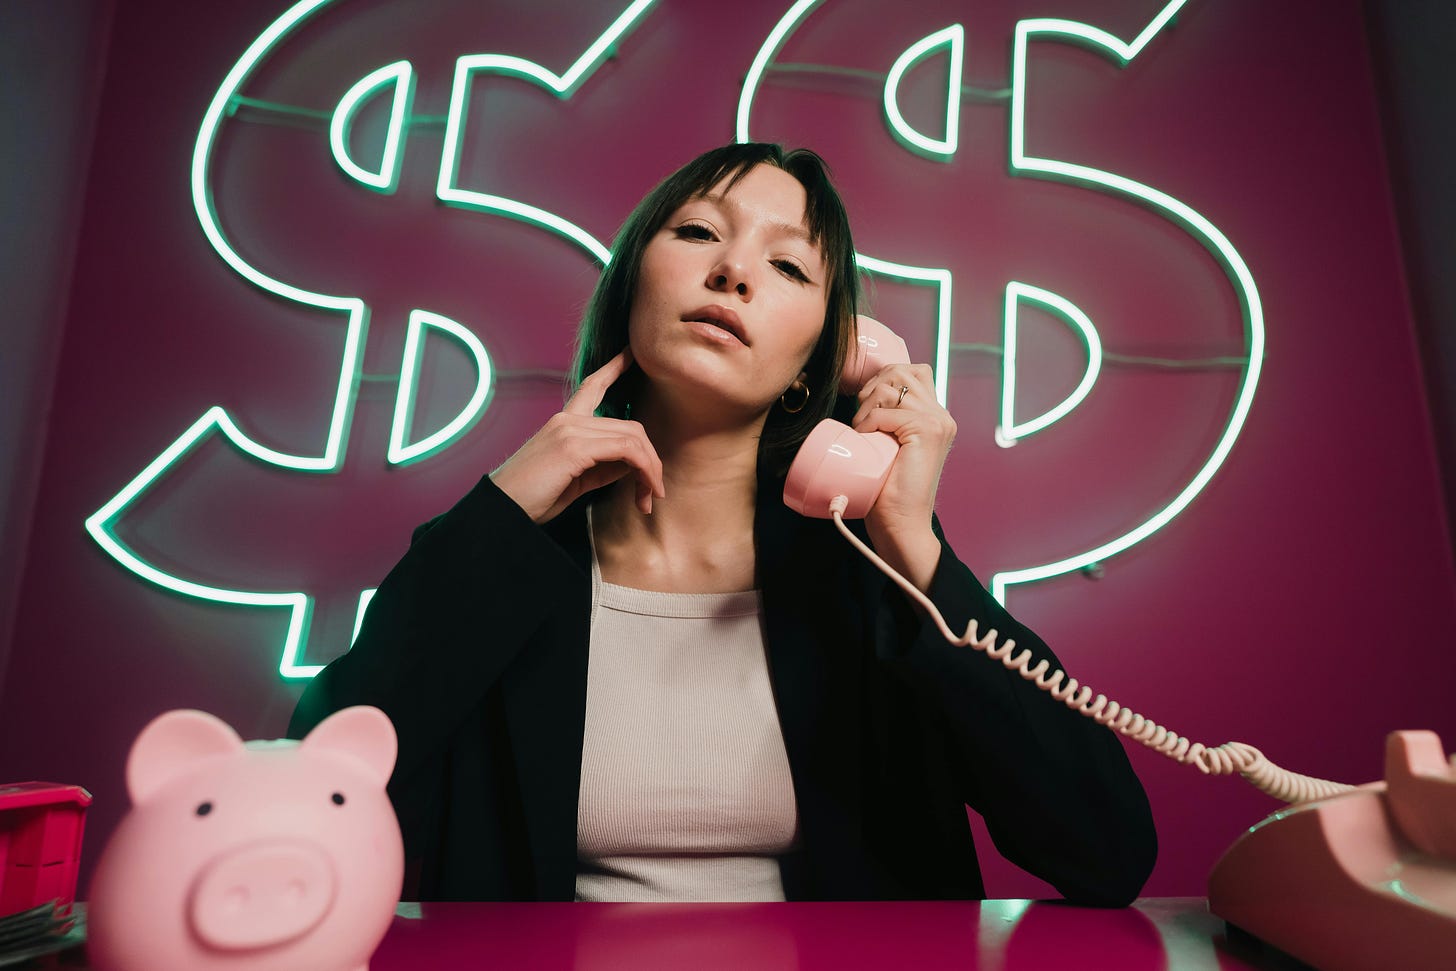 A dark-haired woman wearing a light pink shirt and black sweater sits at a dark pink desk. She is holding a pink telephone receiver in her left hand up to her ear. Behind her are two neon dollar signs on a dark pink wall. On the desk in front of her is a pink piggy bank.